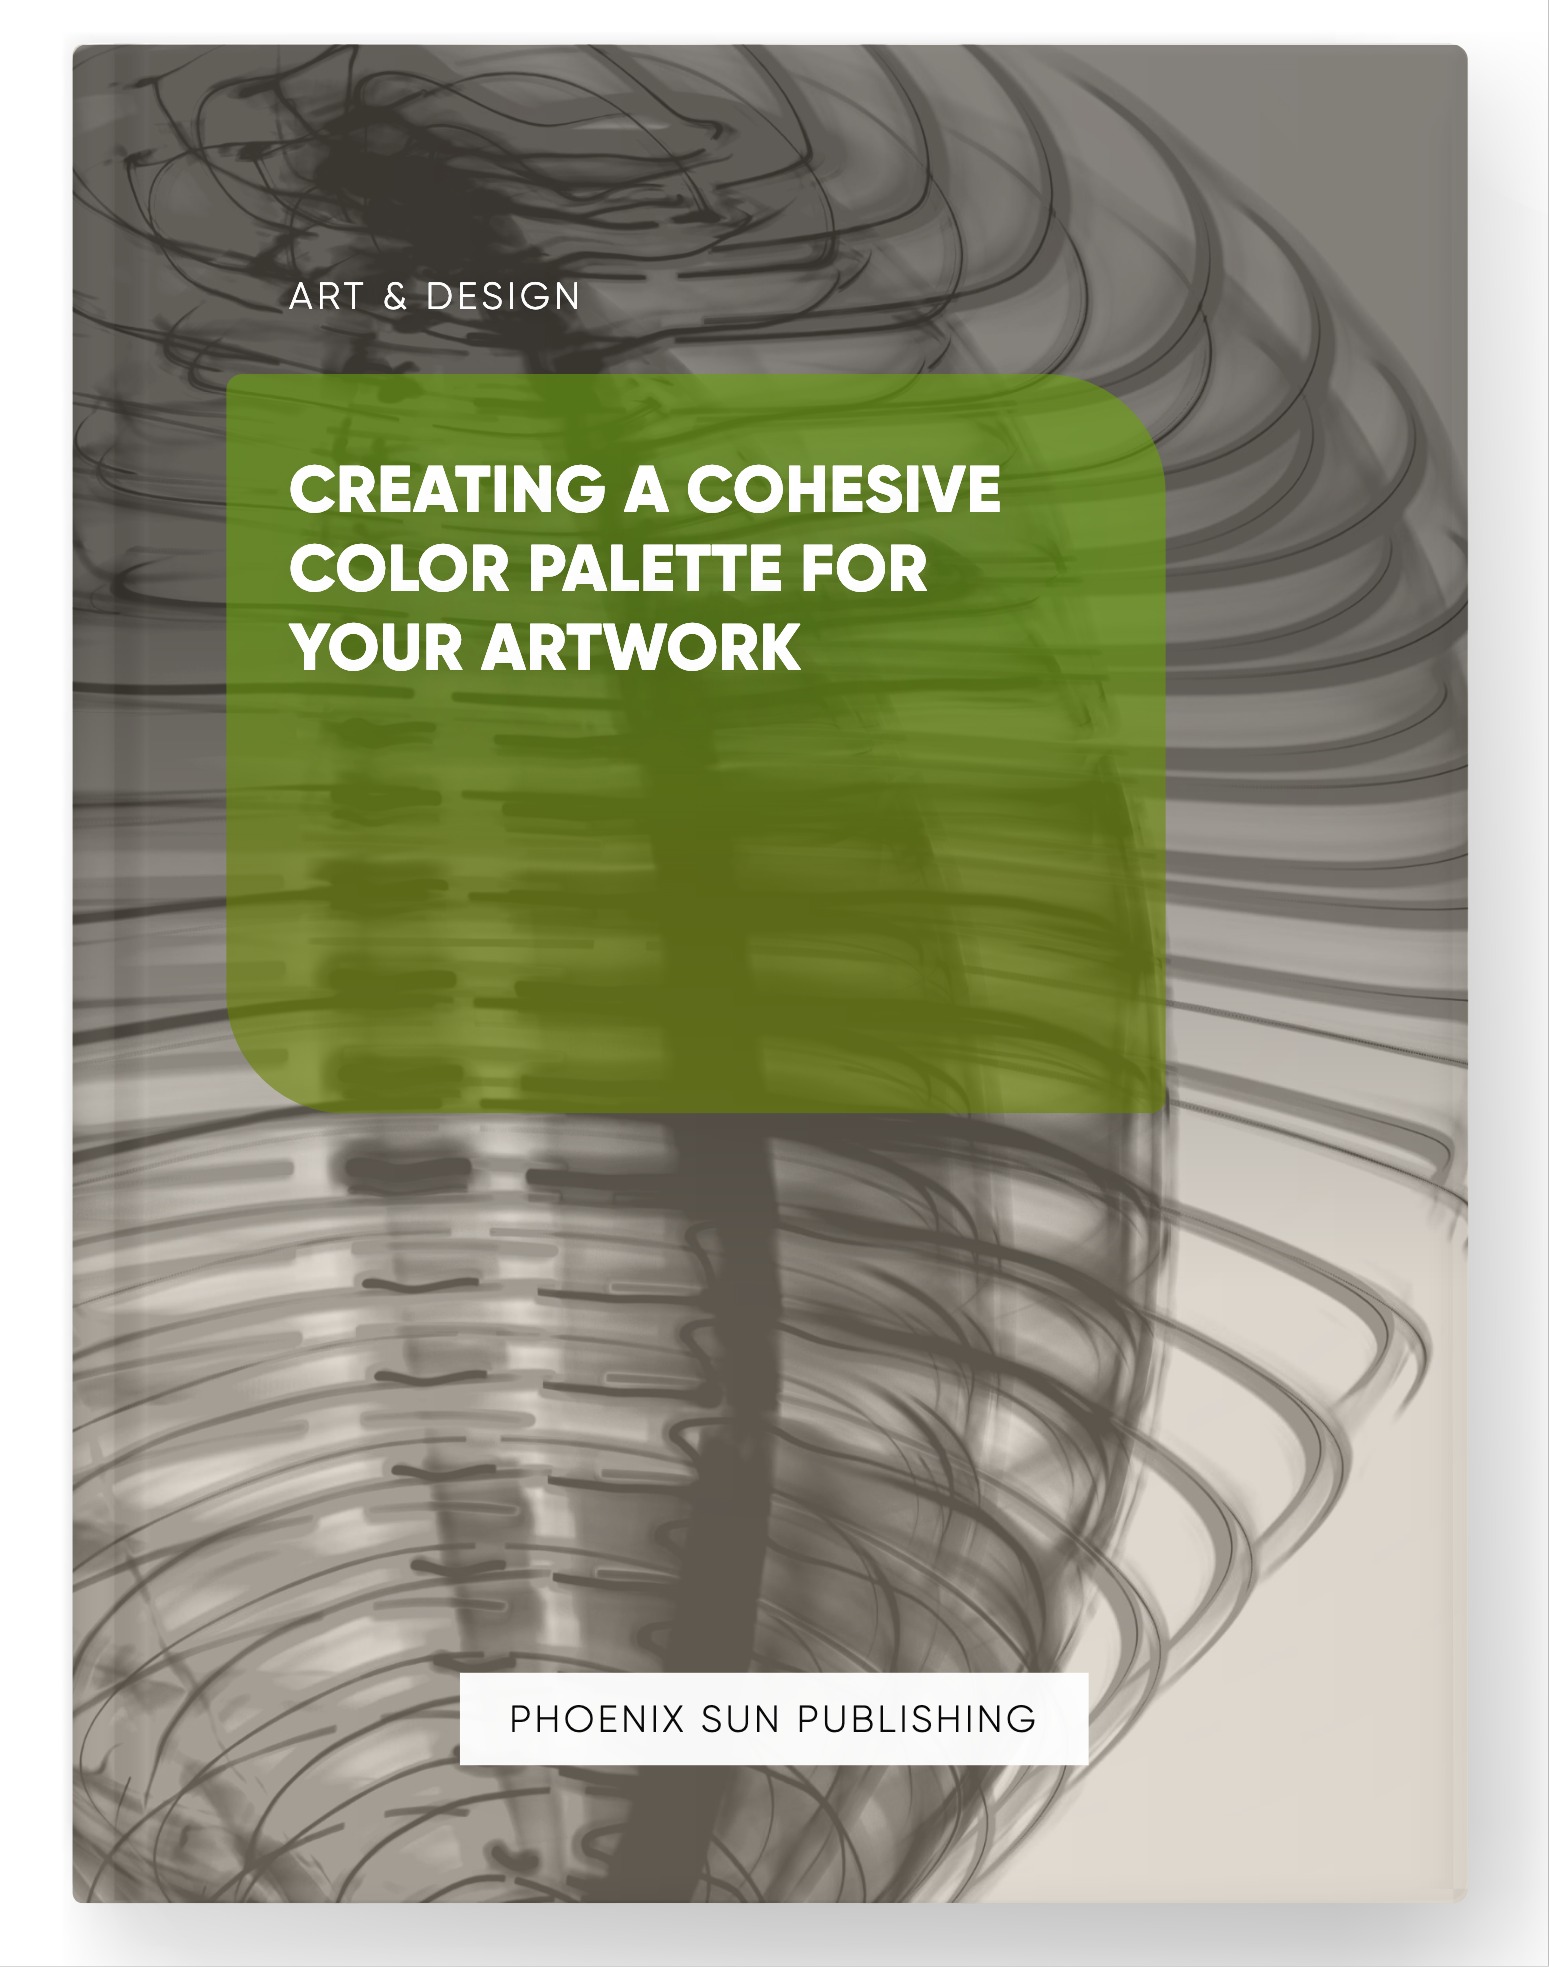 Creating a Cohesive Color Palette for Your Artwork